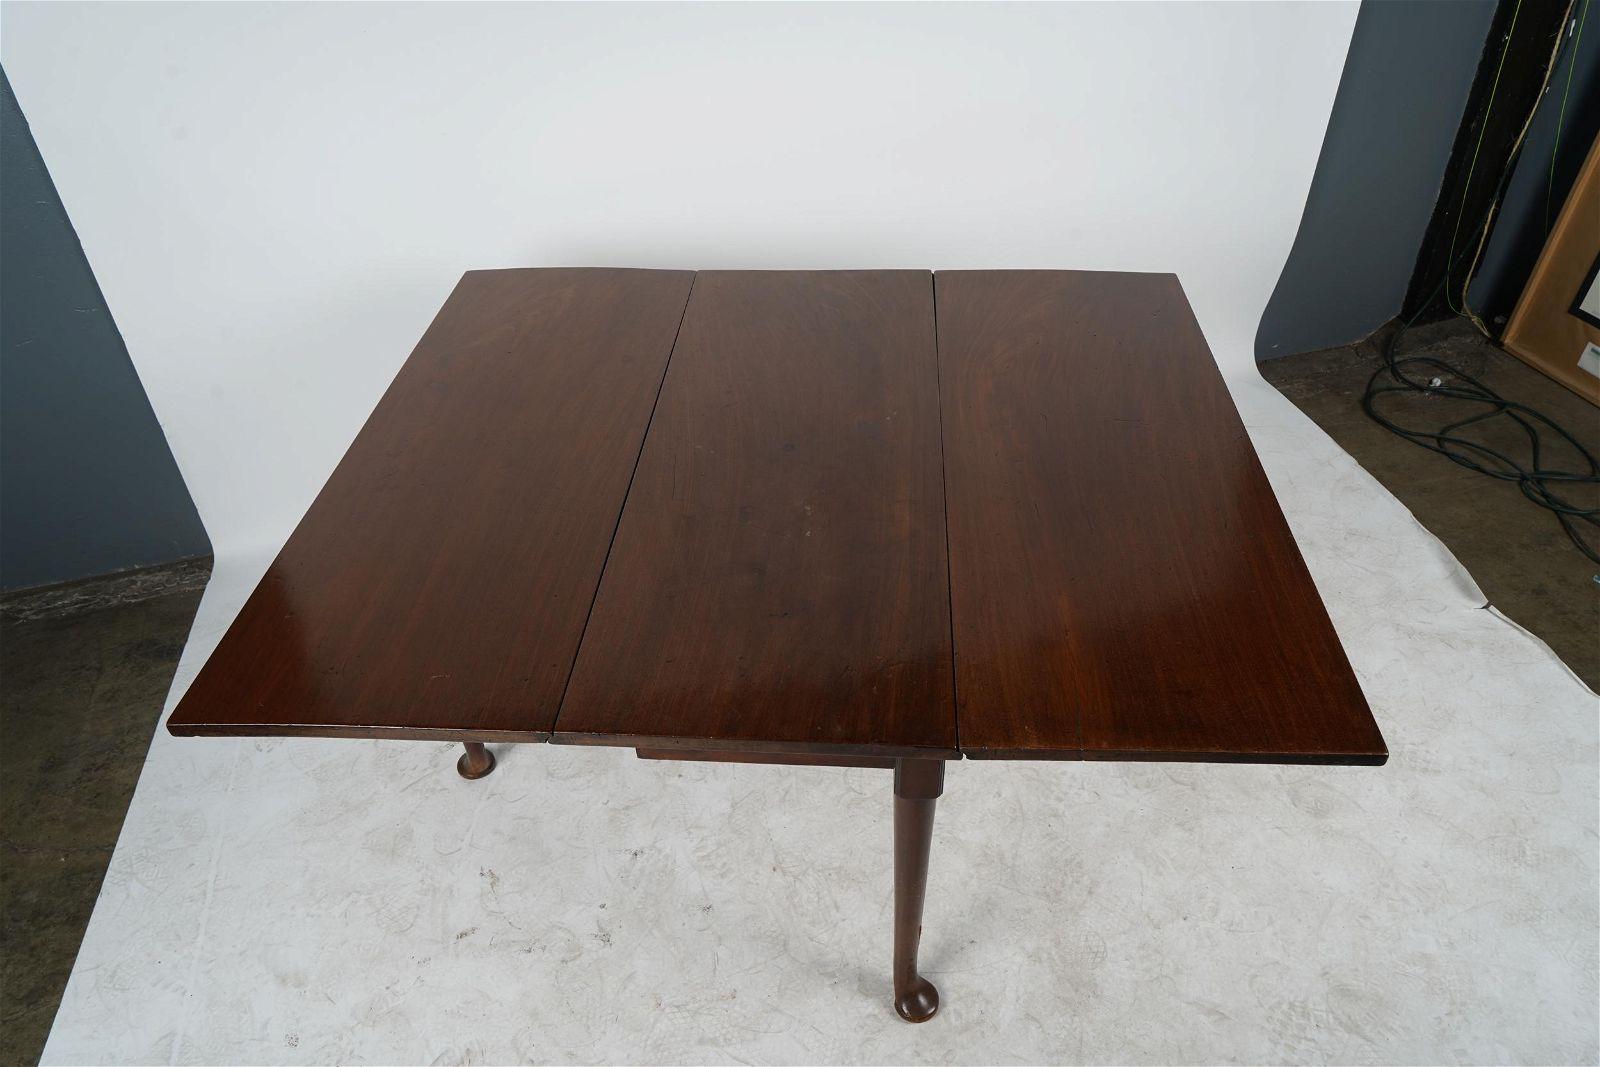 Antique Period English Queen Anne Mahogany Drop Leaf Table Late 18th Century For Sale 3